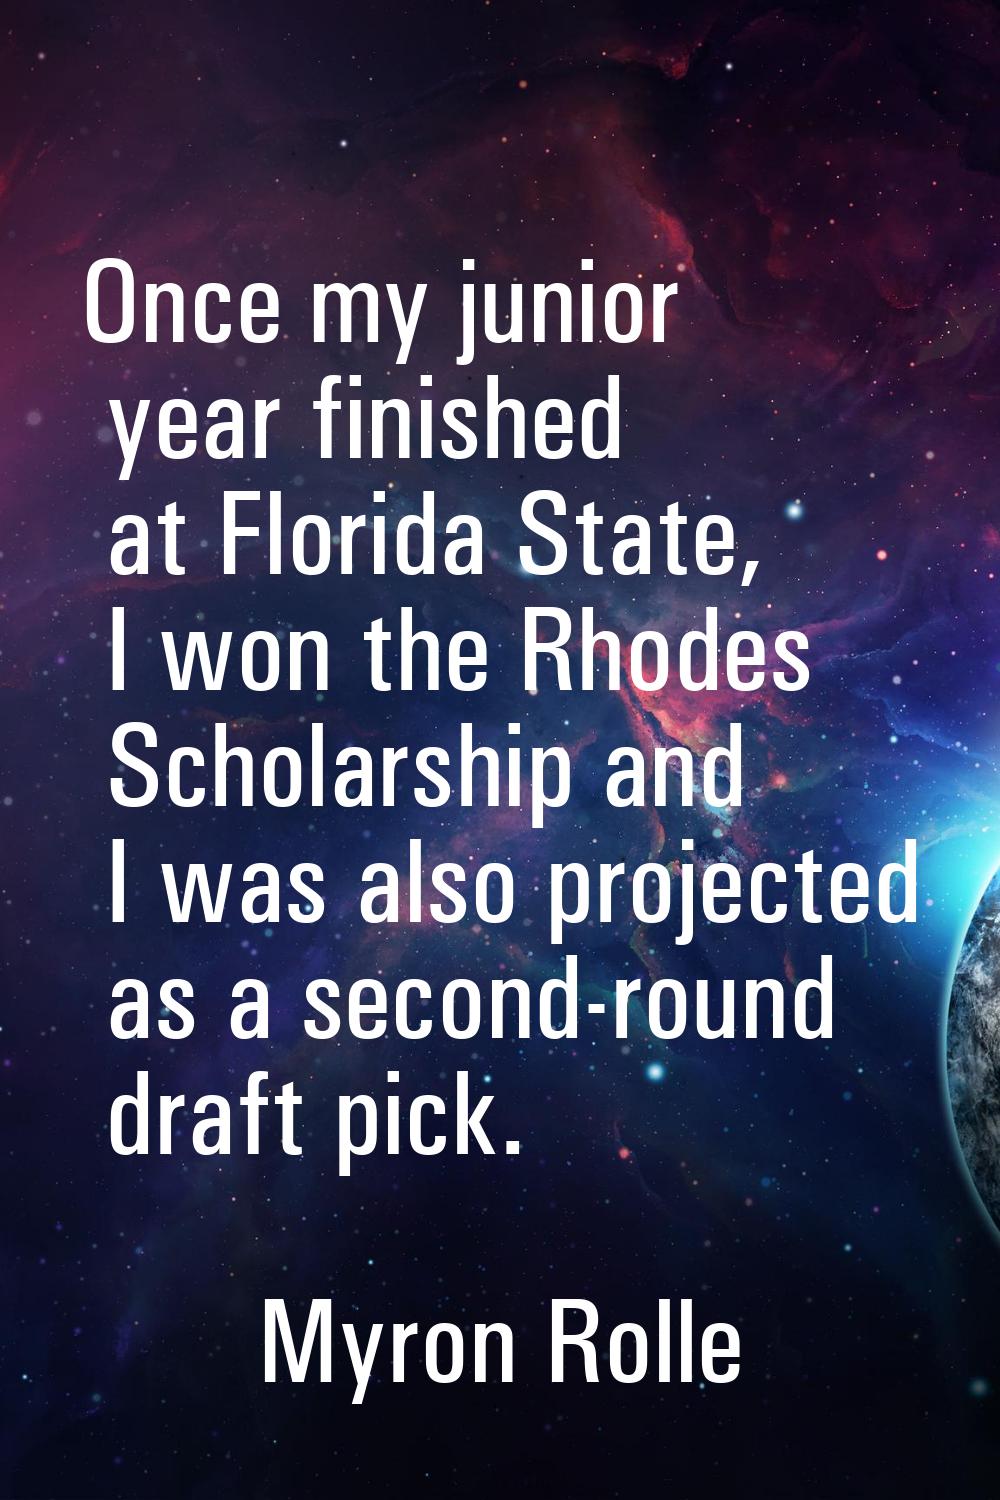 Once my junior year finished at Florida State, I won the Rhodes Scholarship and I was also projecte